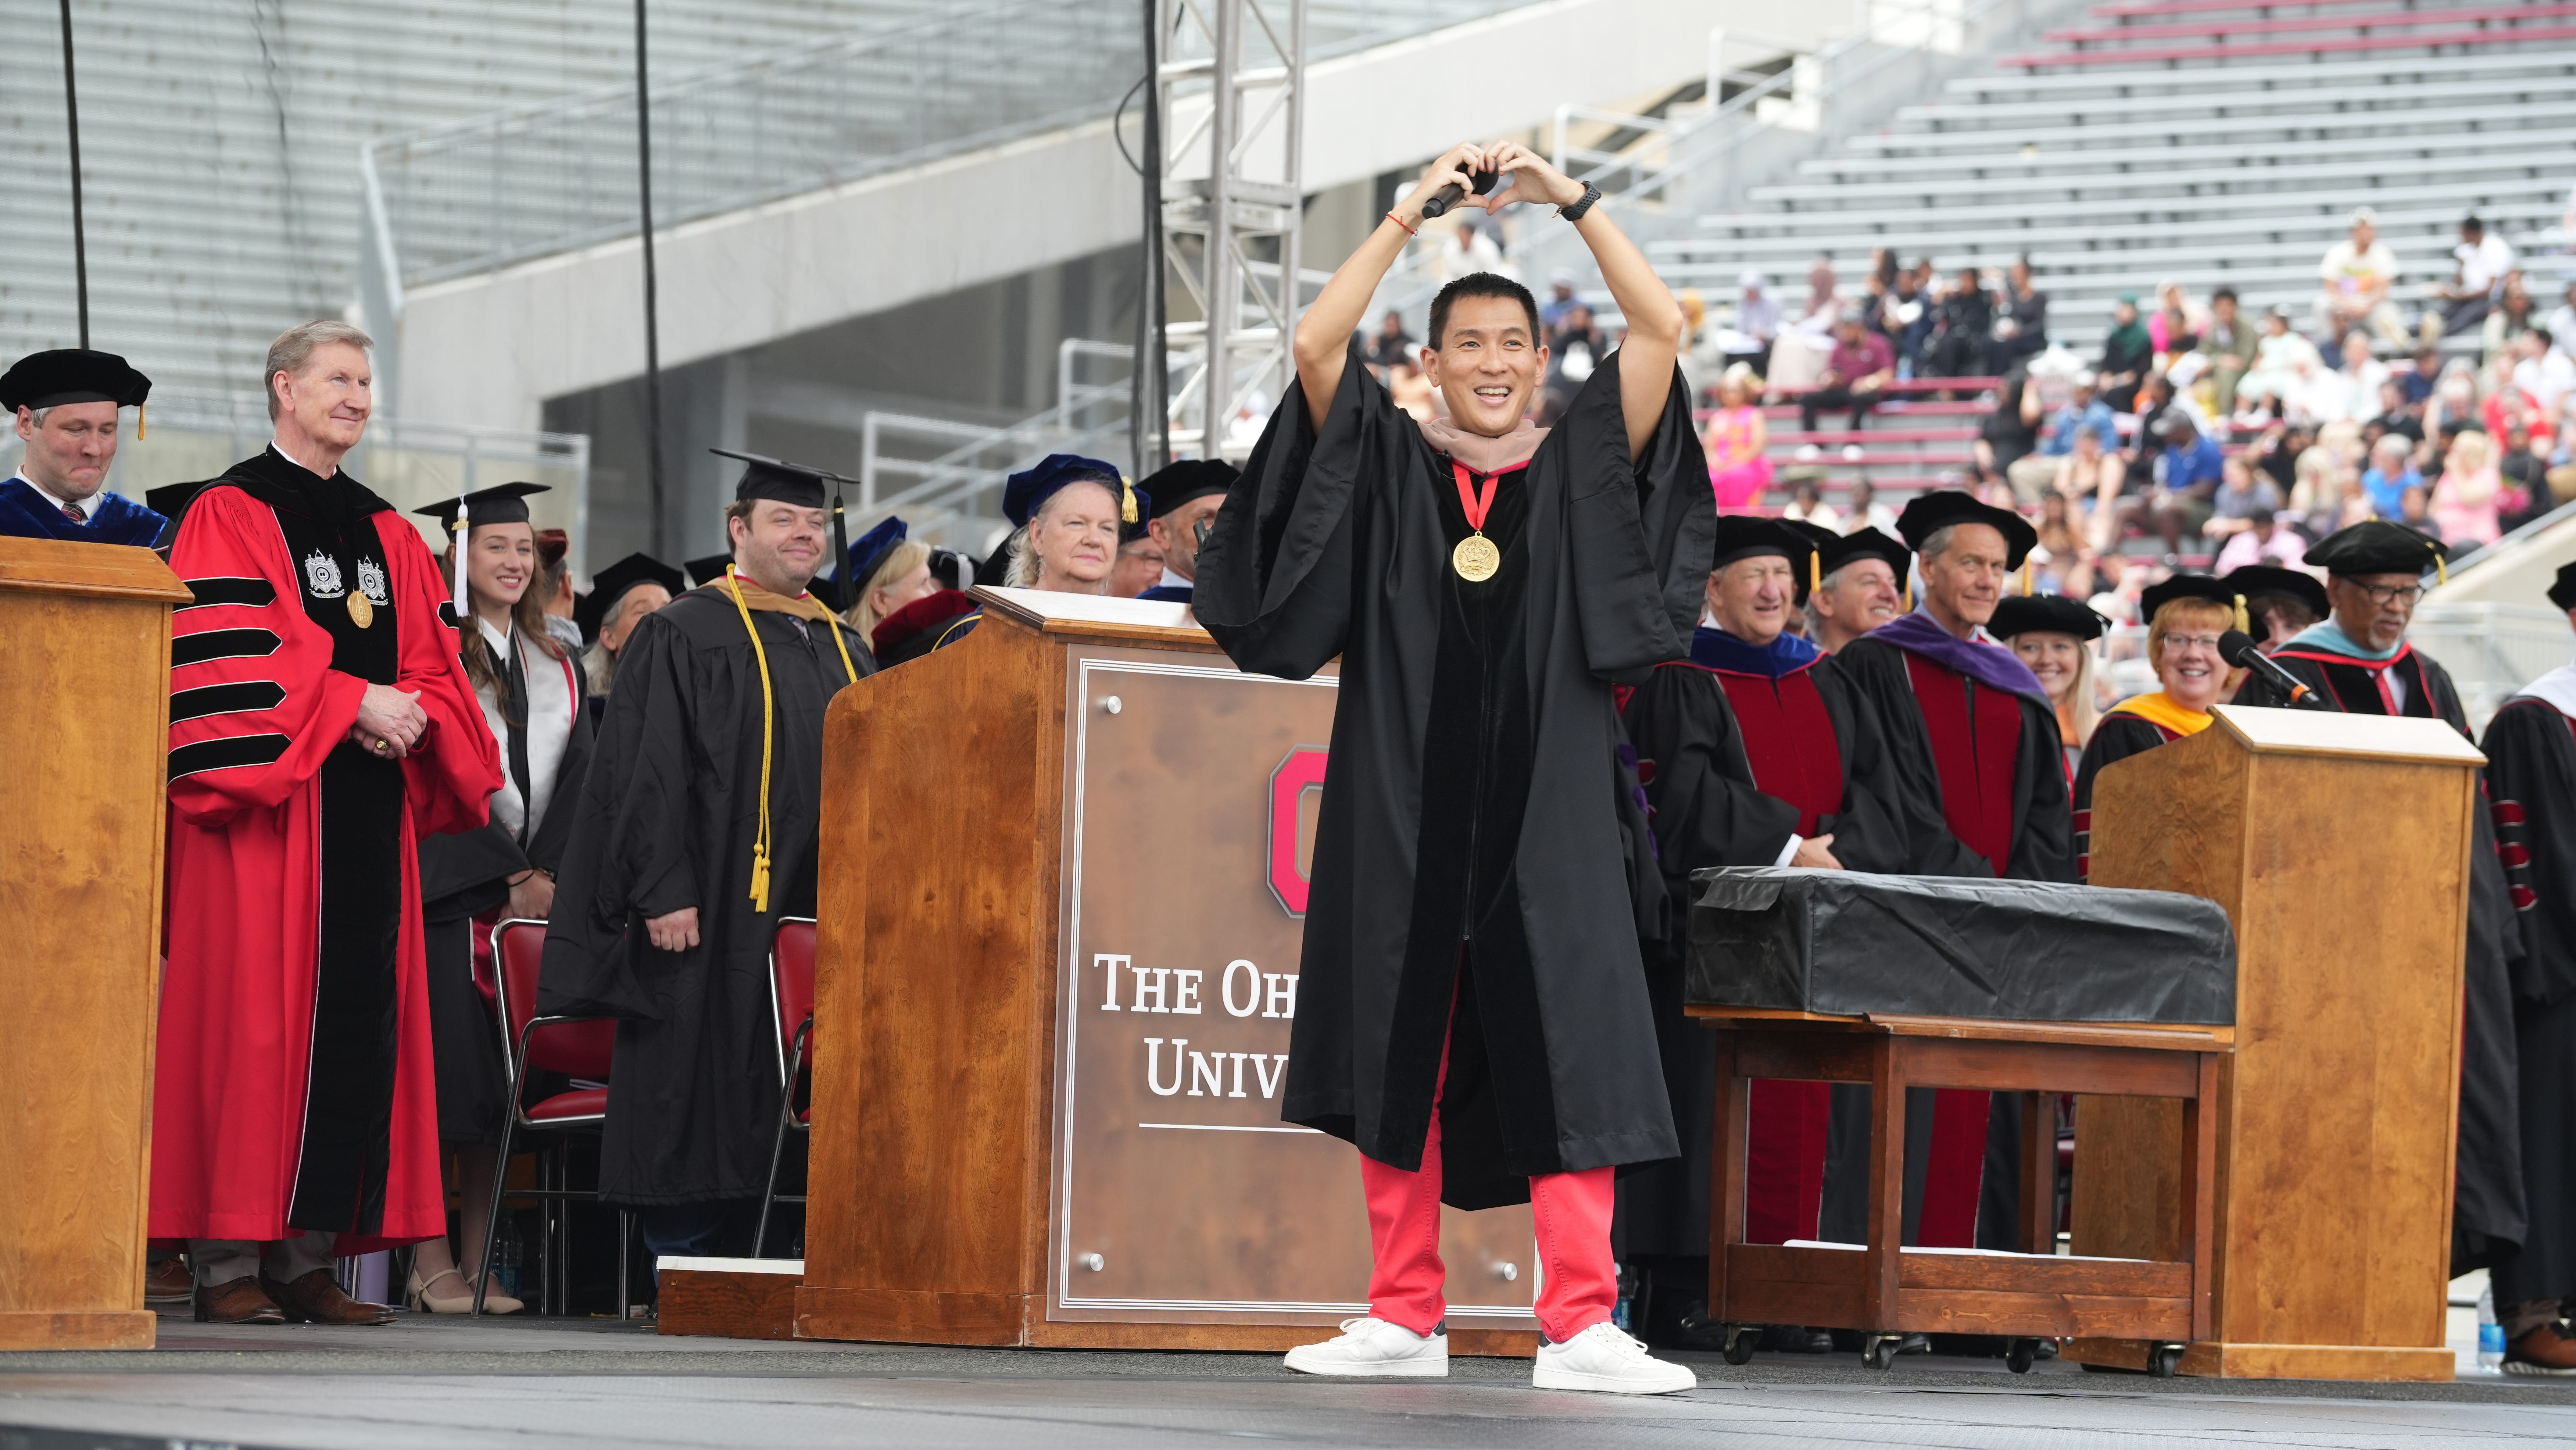 Chris Pan gave bizarre Ohio State commencement address — here's who he was picked over